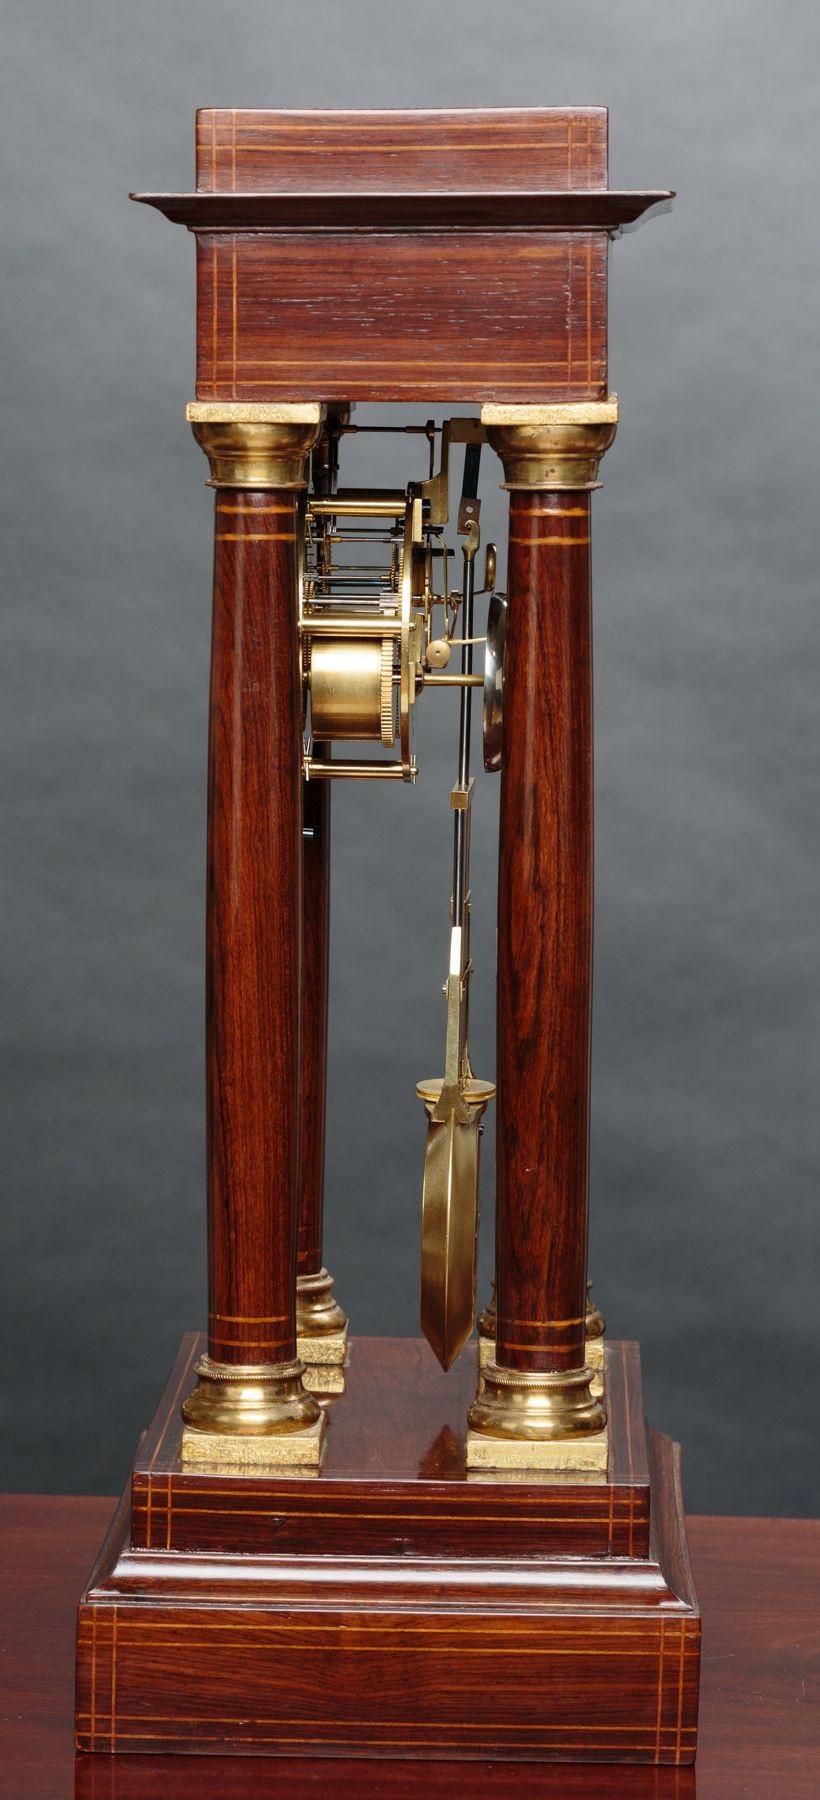 Rosewood Portico Regulator Mantel Clock

Housed in a fine quality Rosewood portico case with boxwood stringing, turned pillars with brass capitals, gilded cast foliate bezel and standing on an inlaid stepped base.
Silvered dial with Roman numerals,